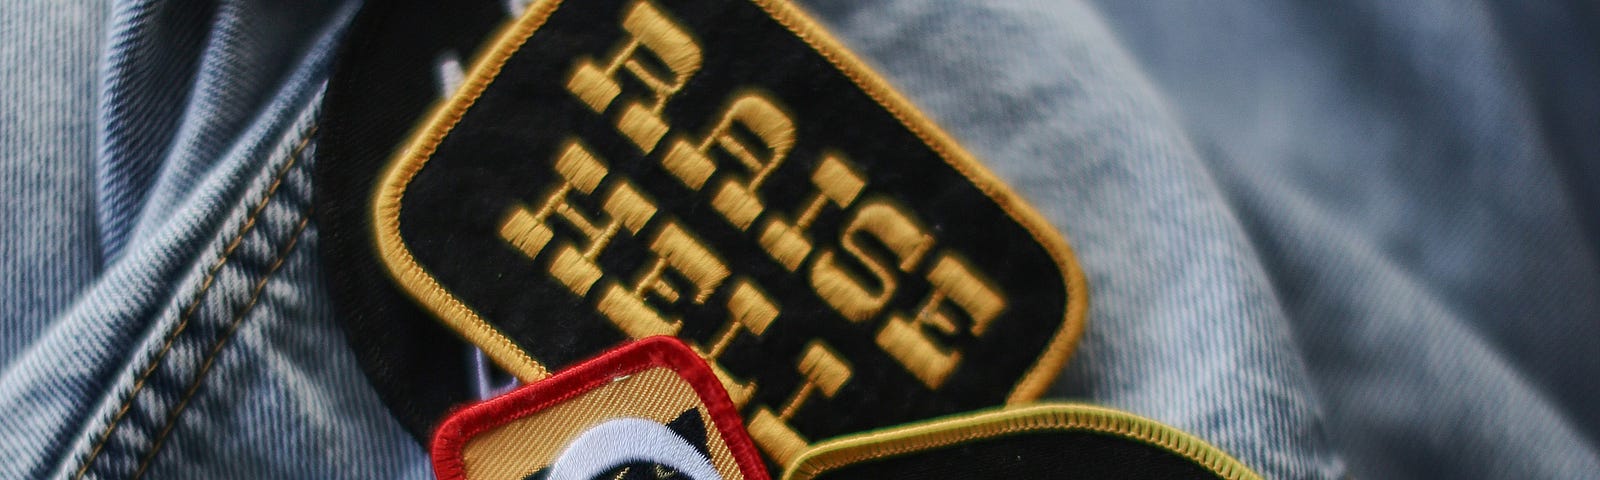 This image shows a collection of quirky and colorful patches on a denim jacket. The patches feature various fun and humorous messages such as “Raise Hell”, “I’m Not Tired”, and “Support Your Local Emotional Human”. The patches vary in shape and color, adding a personalized touch to the jacket.